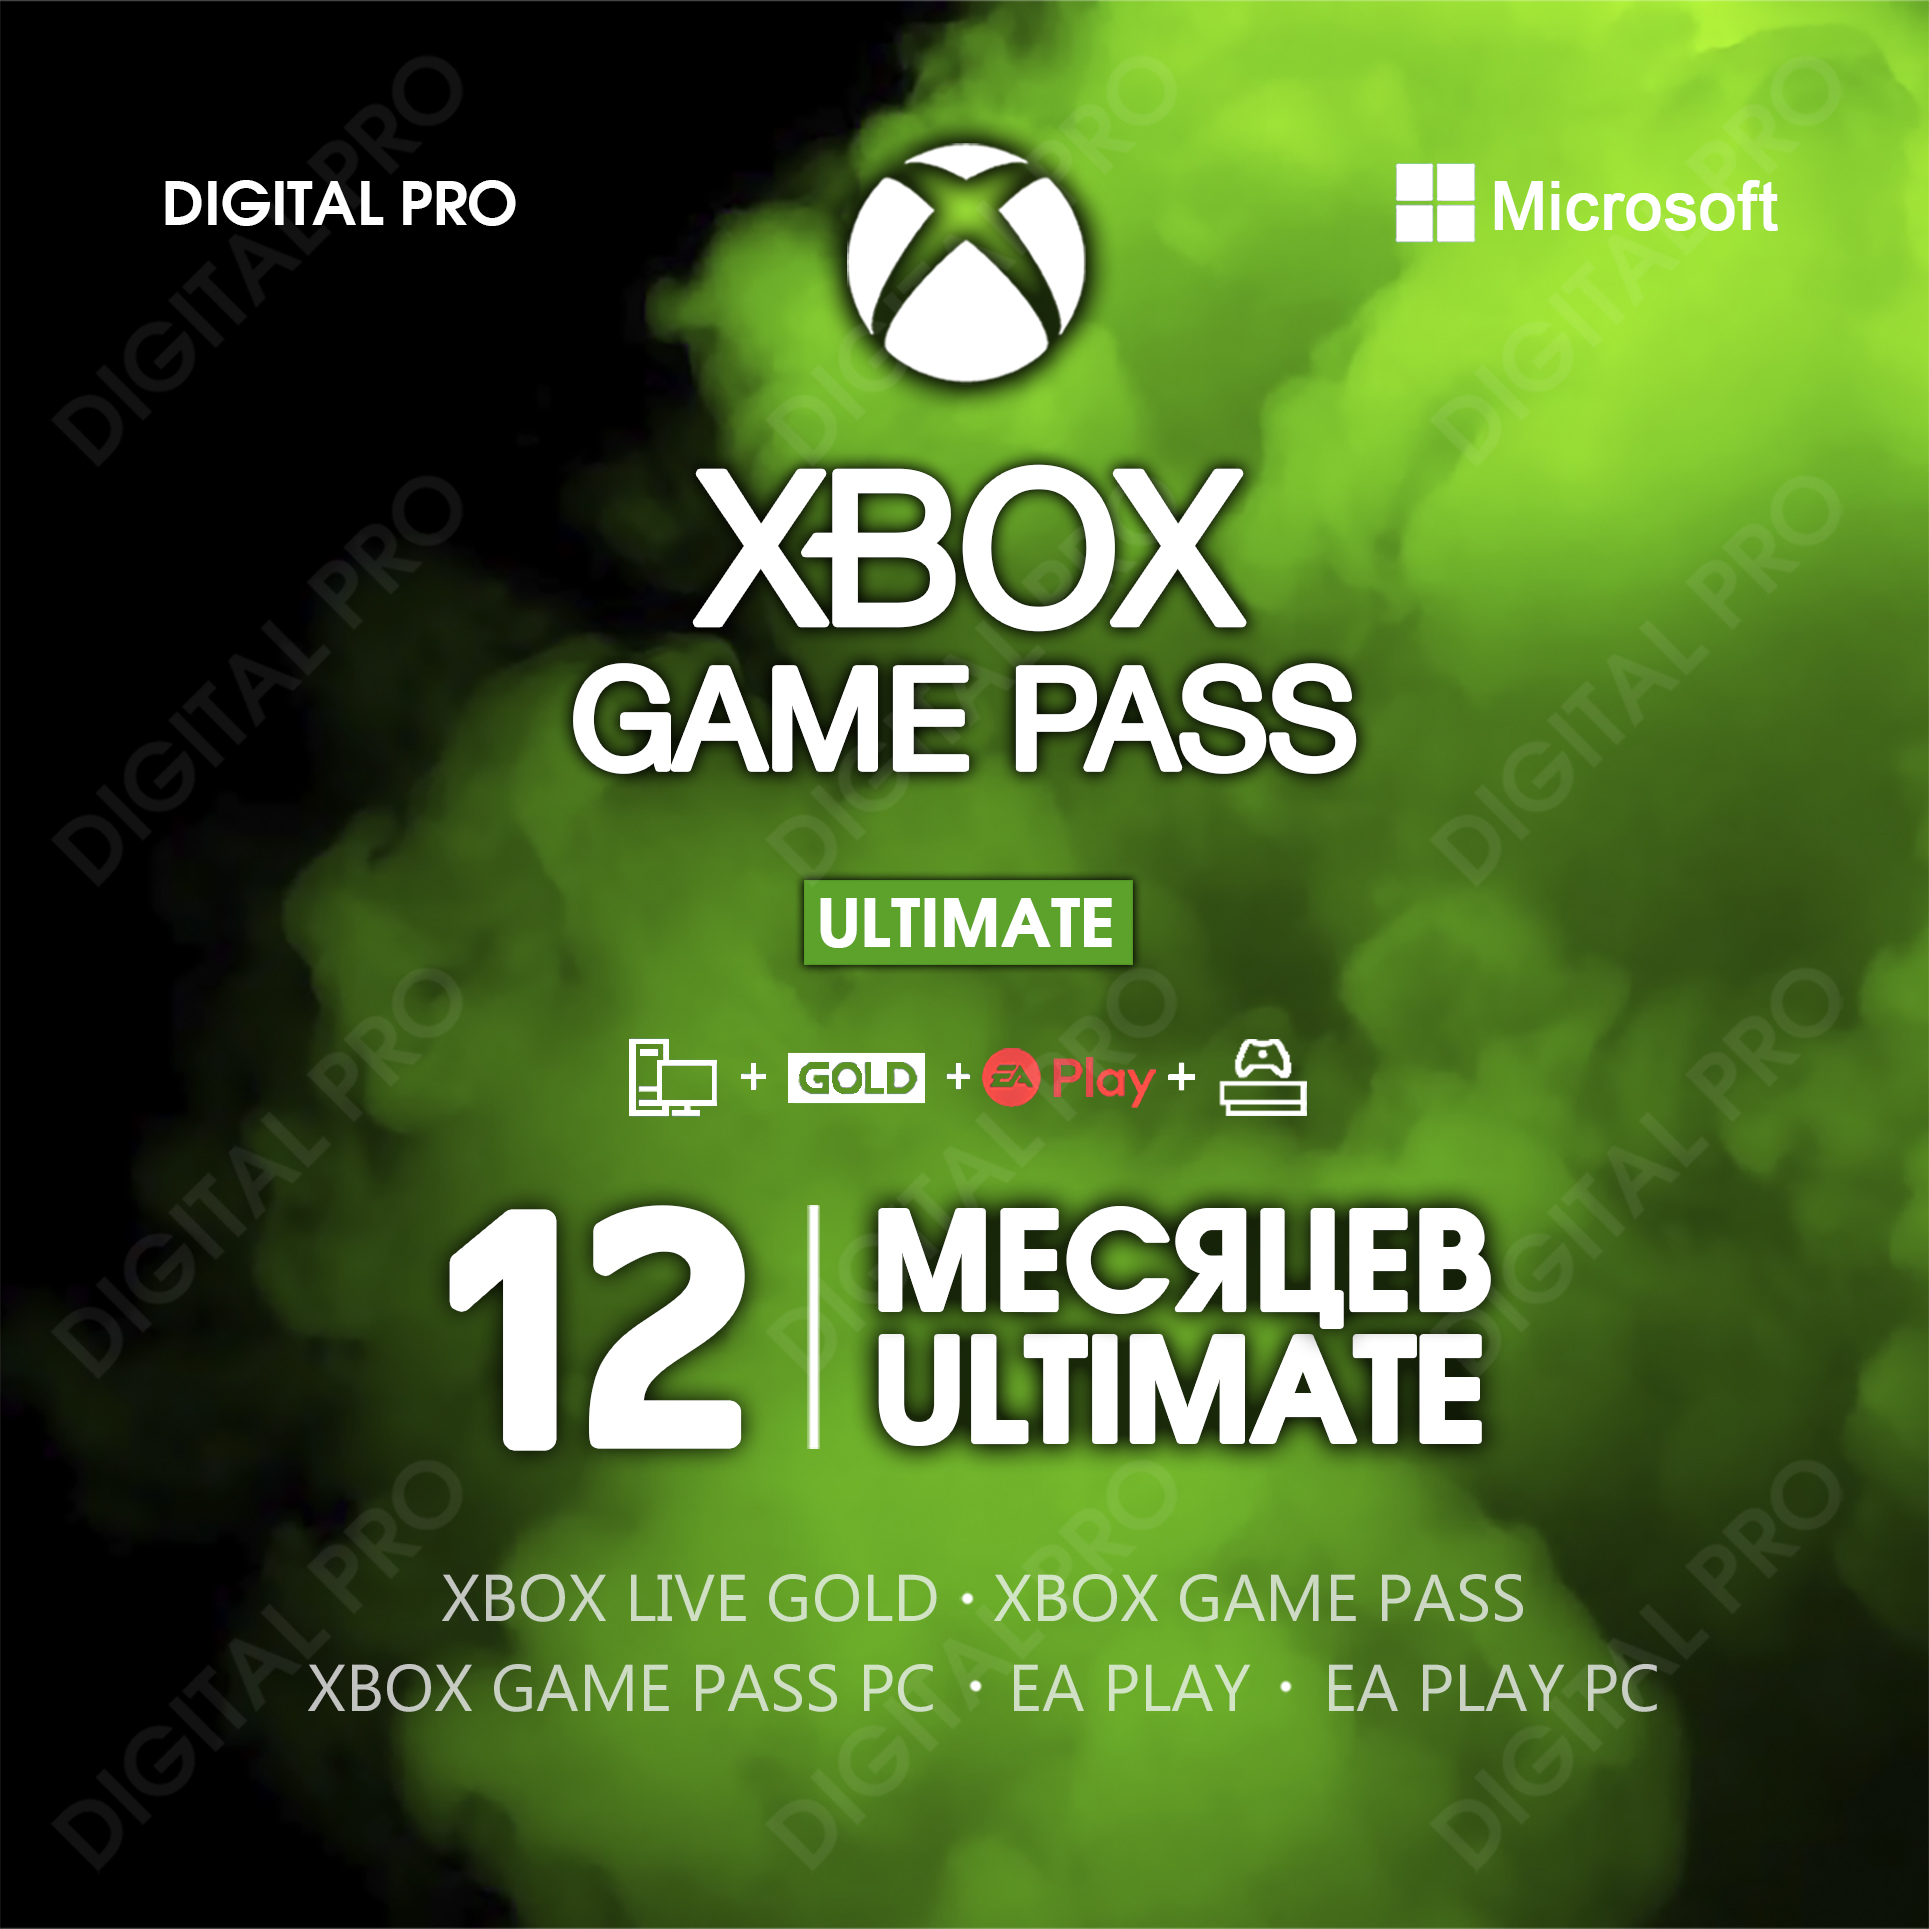 ⚡XBOX GAME PASS ULTIMATE 12 MONTHS / FULL ACCESS 🏅